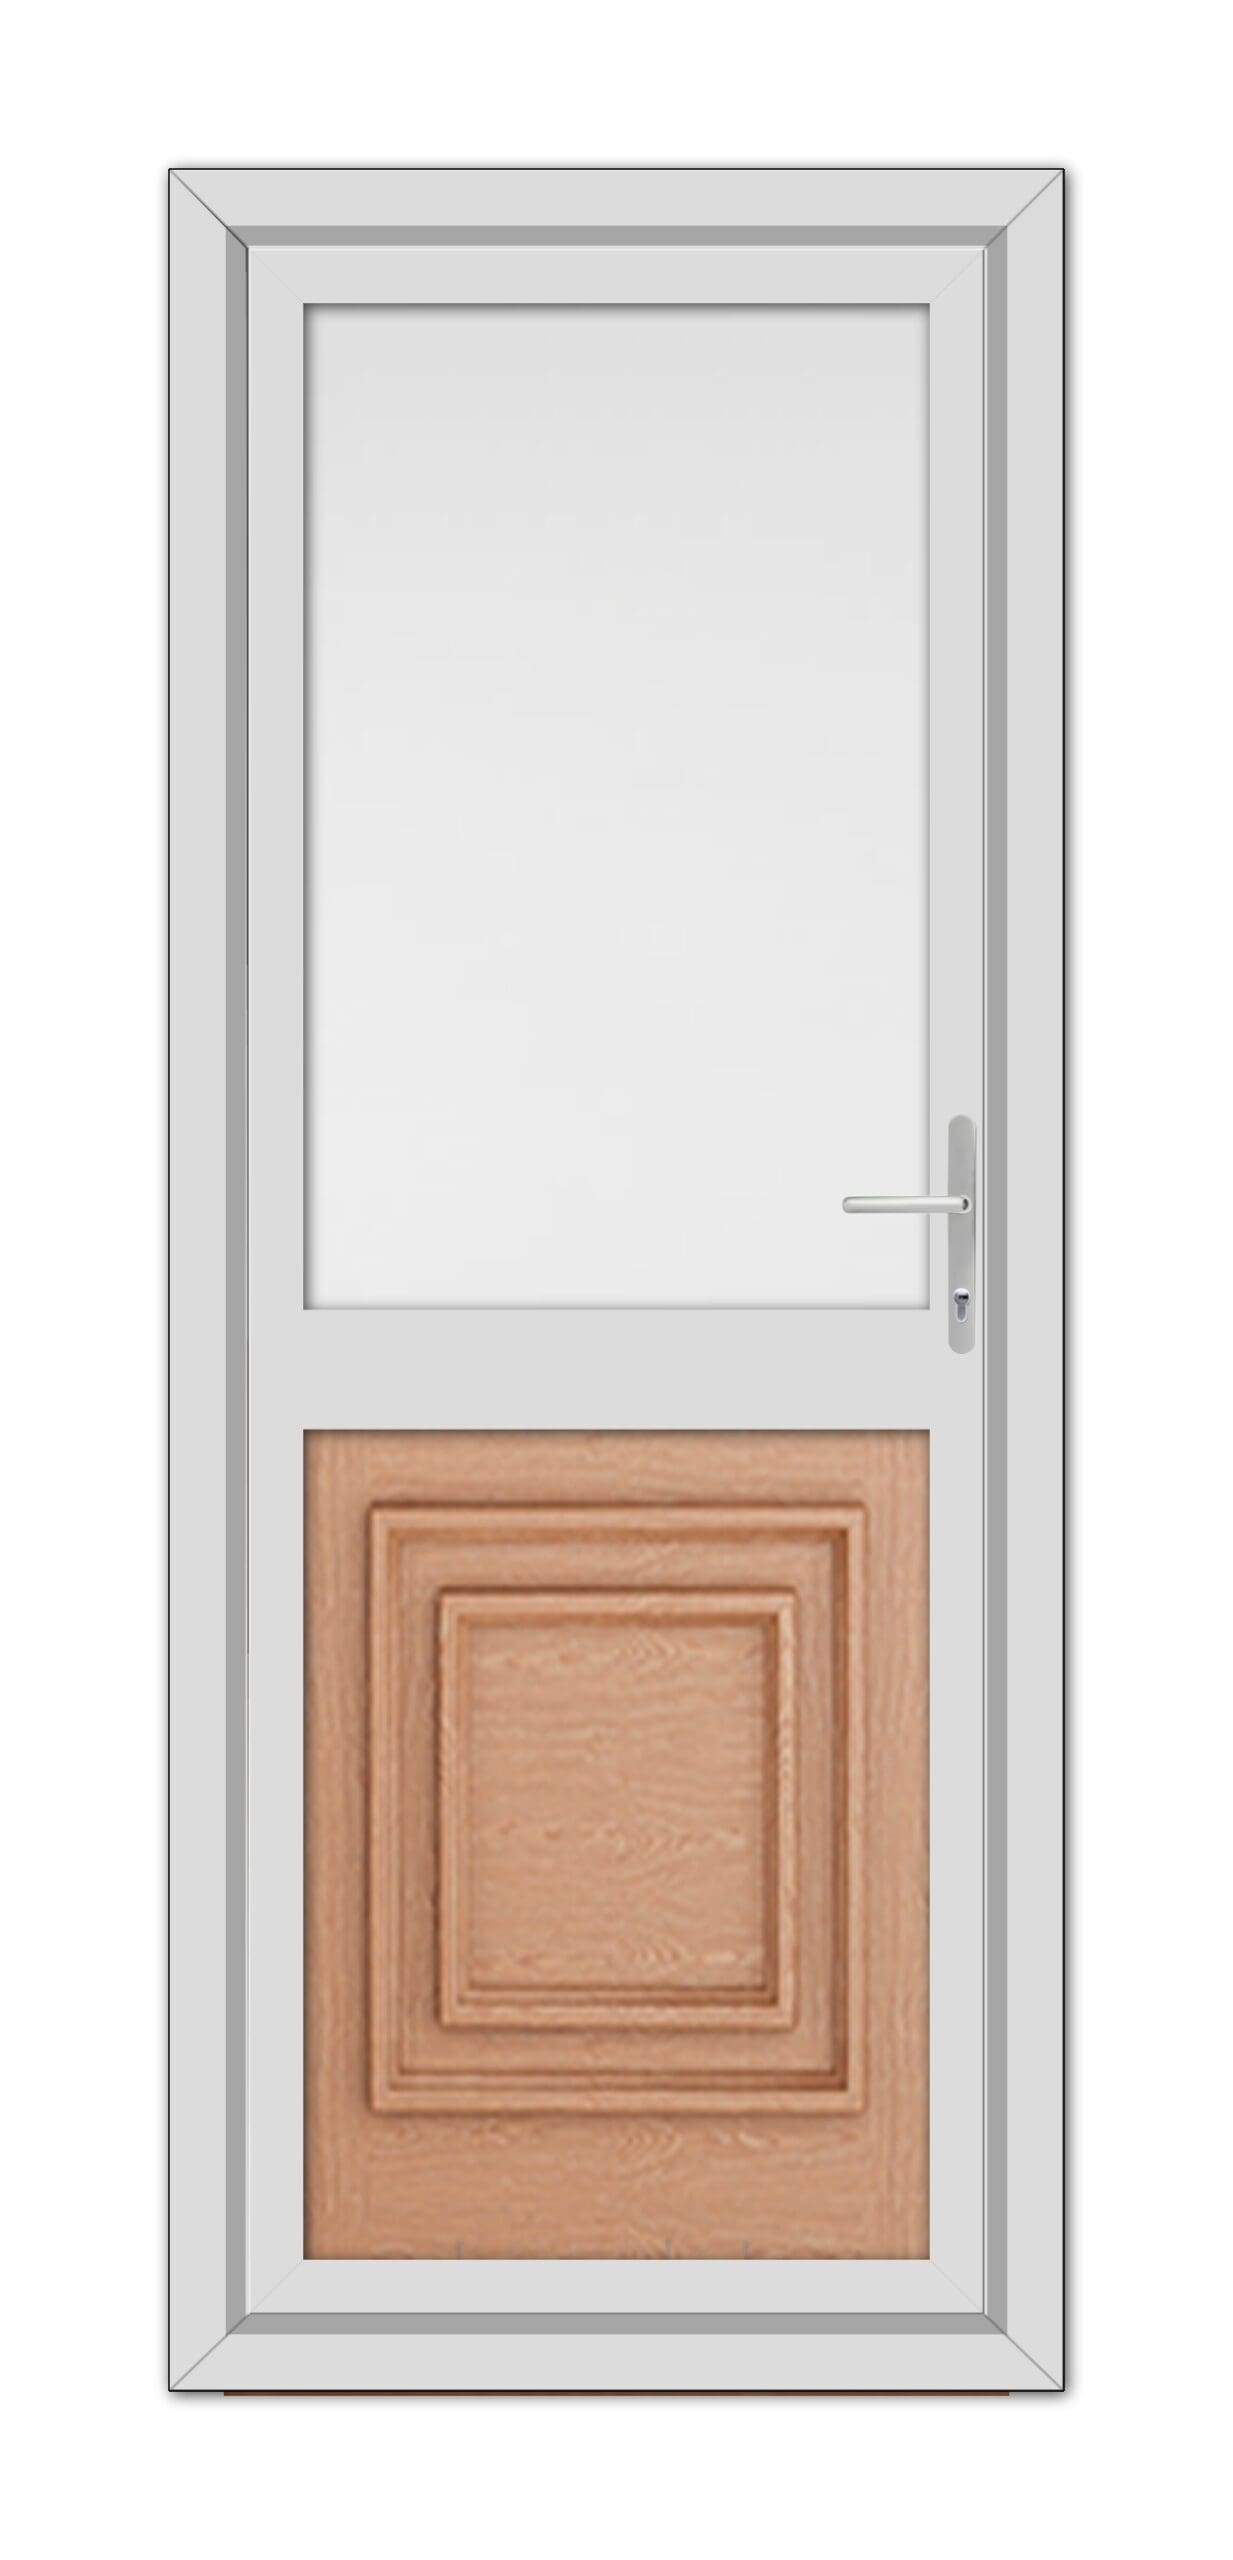 A contemporary door featuring a white frame, top glass panel, and a lower wooden panel with a geometric pattern, equipped with a modern handle. - Irish Oak Hannover Half uPVC Back Door